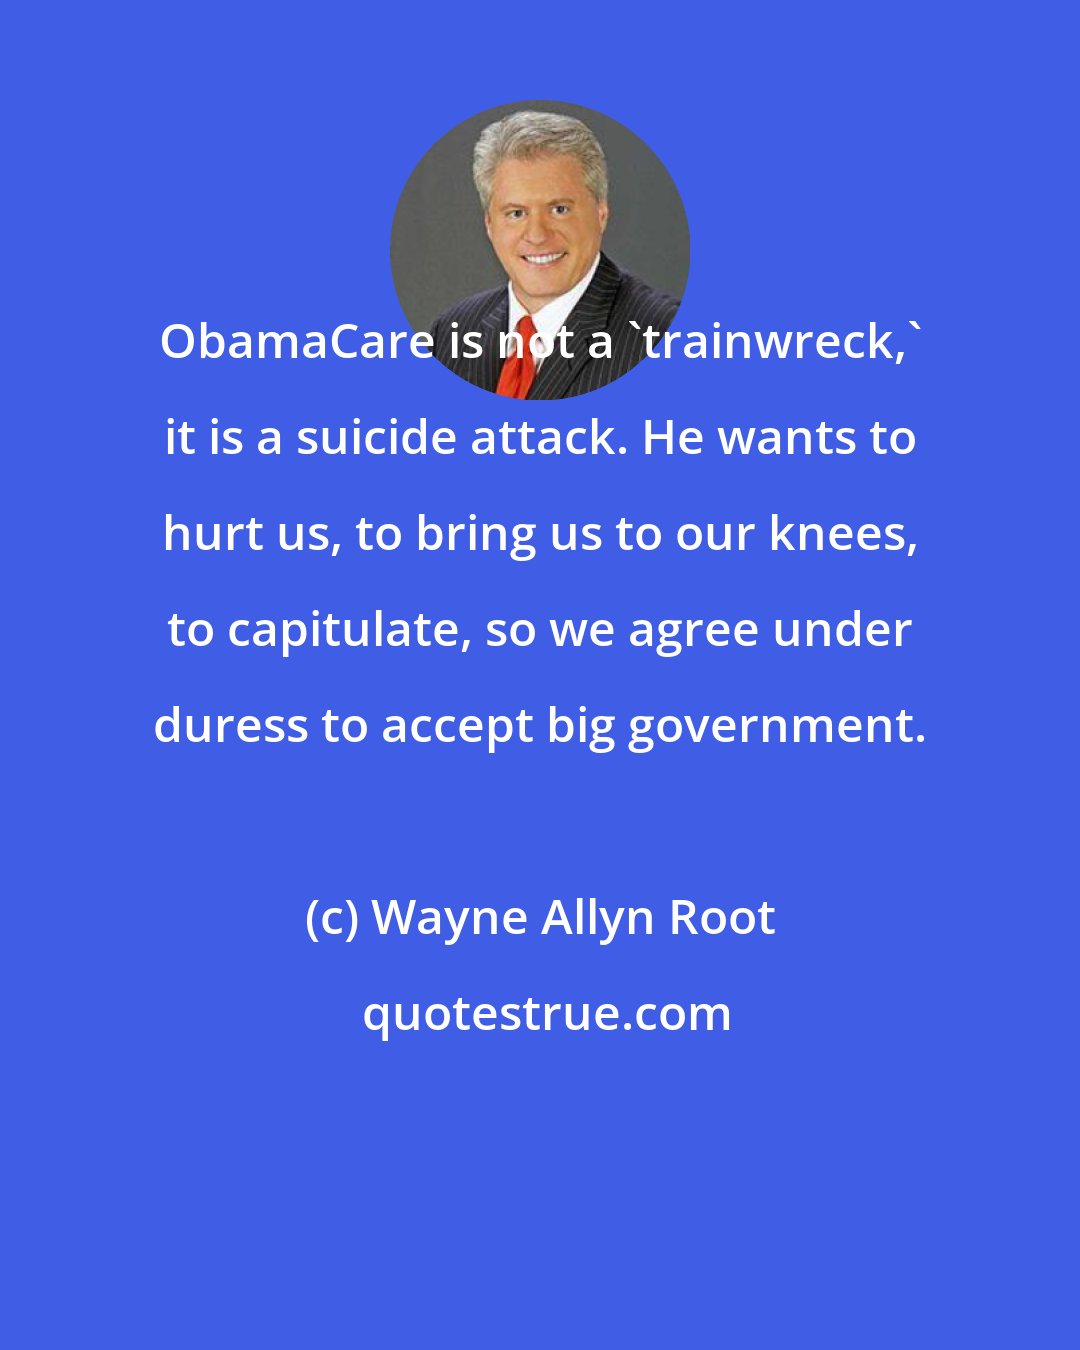 Wayne Allyn Root: ObamaCare is not a 'trainwreck,' it is a suicide attack. He wants to hurt us, to bring us to our knees, to capitulate, so we agree under duress to accept big government.